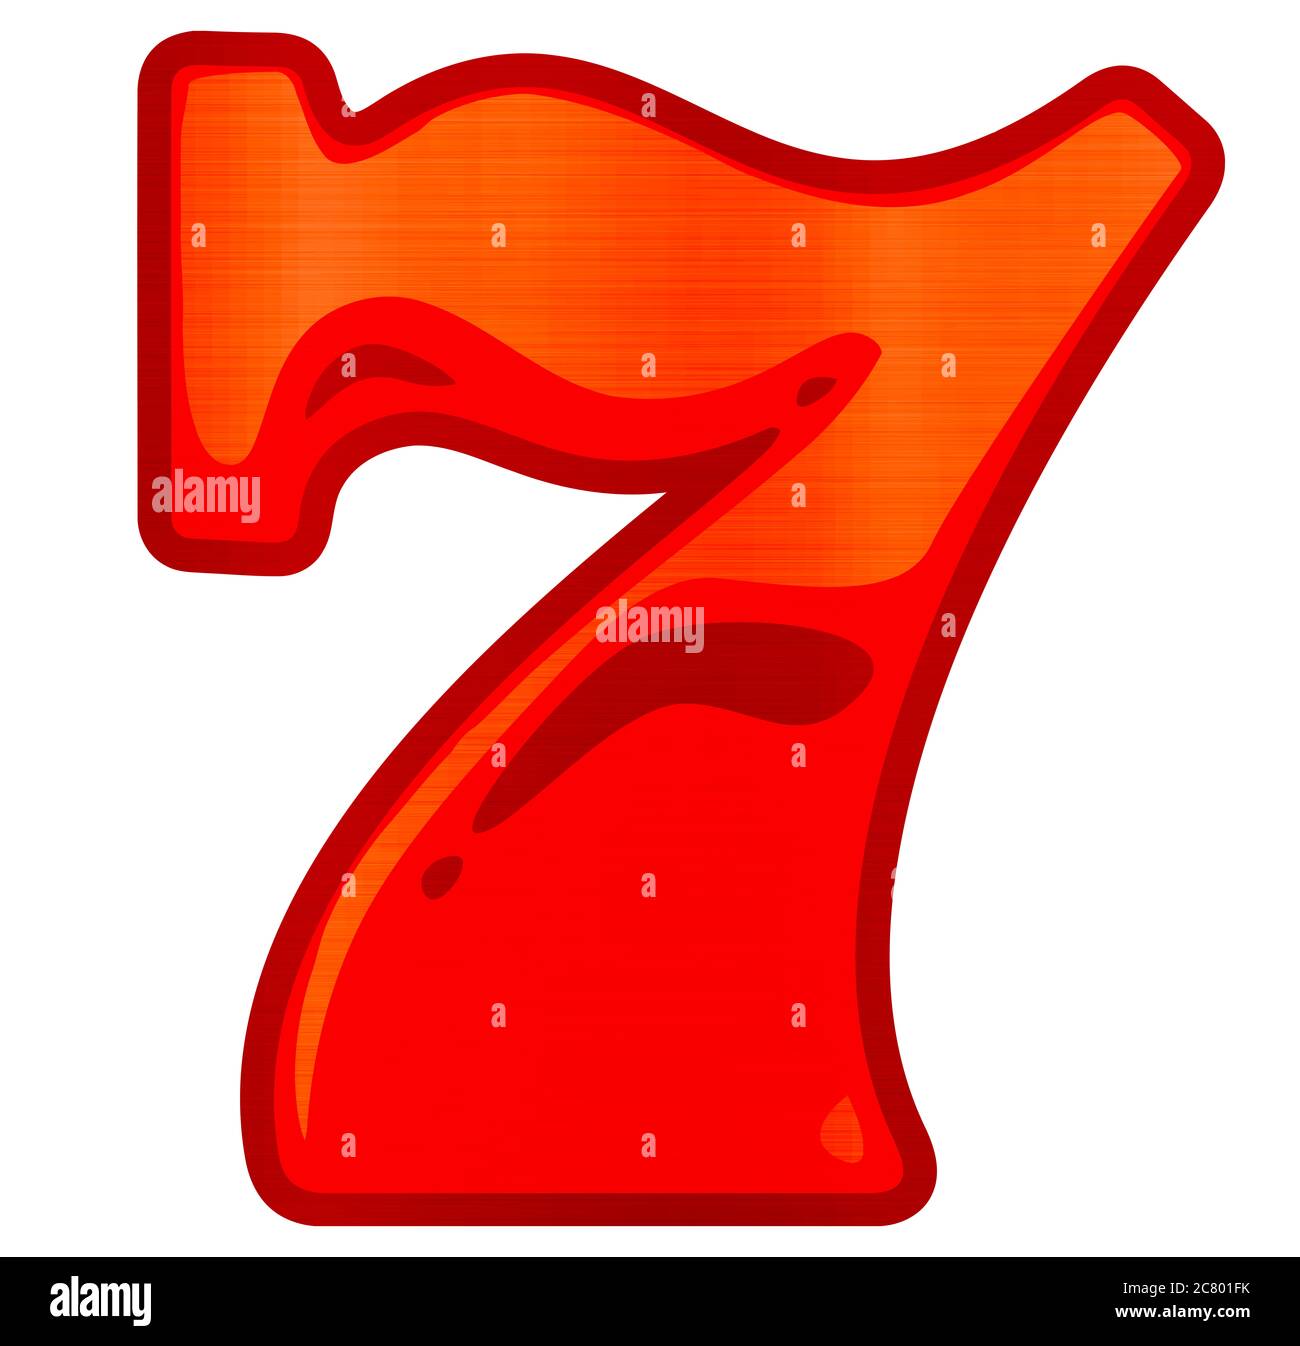 slot machine casino seven number luck red illustration Stock Photo - Alamy